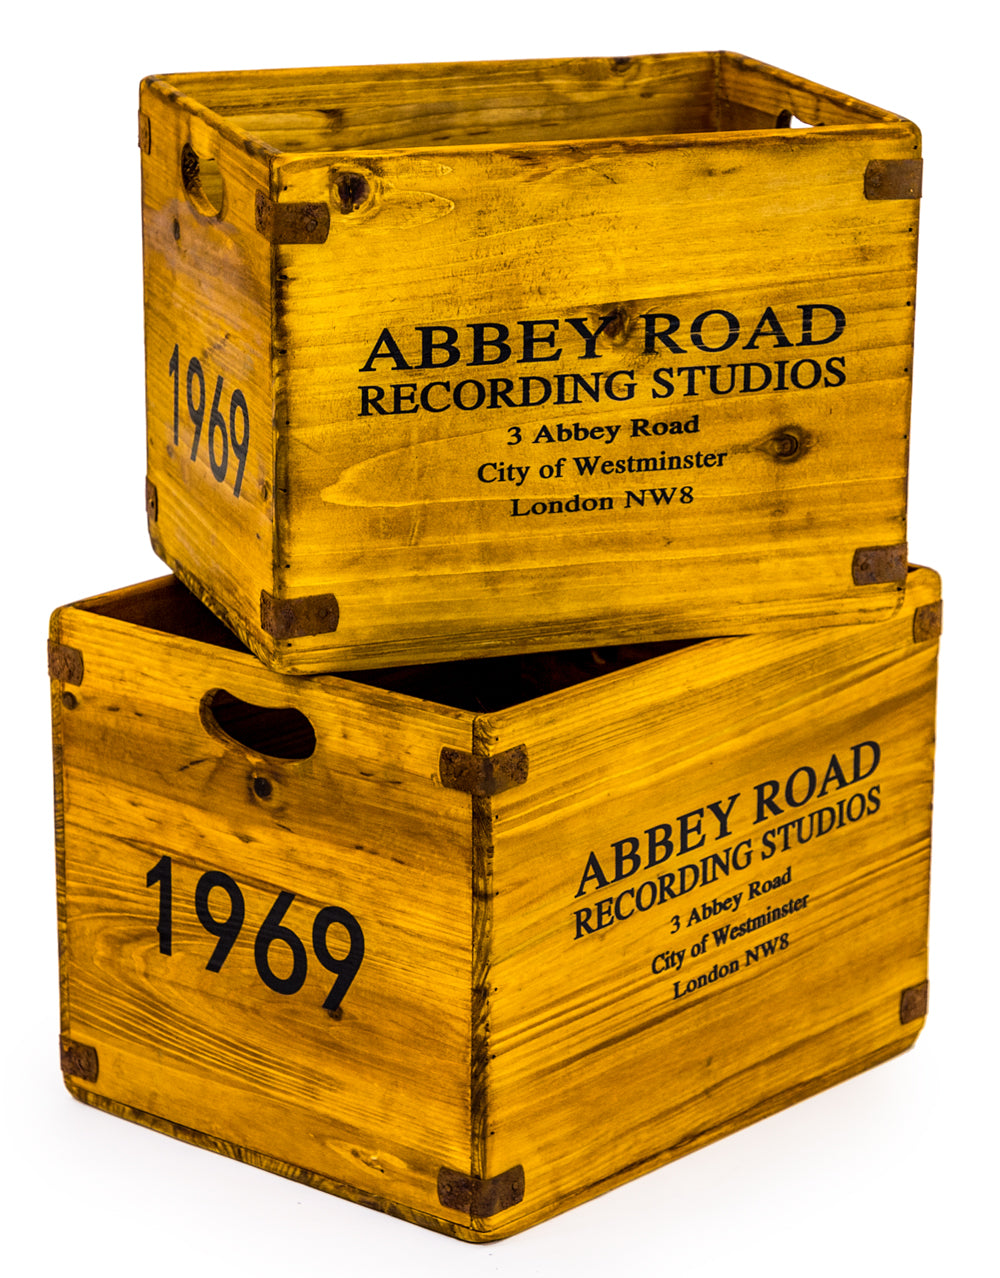 Set of 2 Antiqued Wooden "Abbey Road" LP Record Storage Boxes